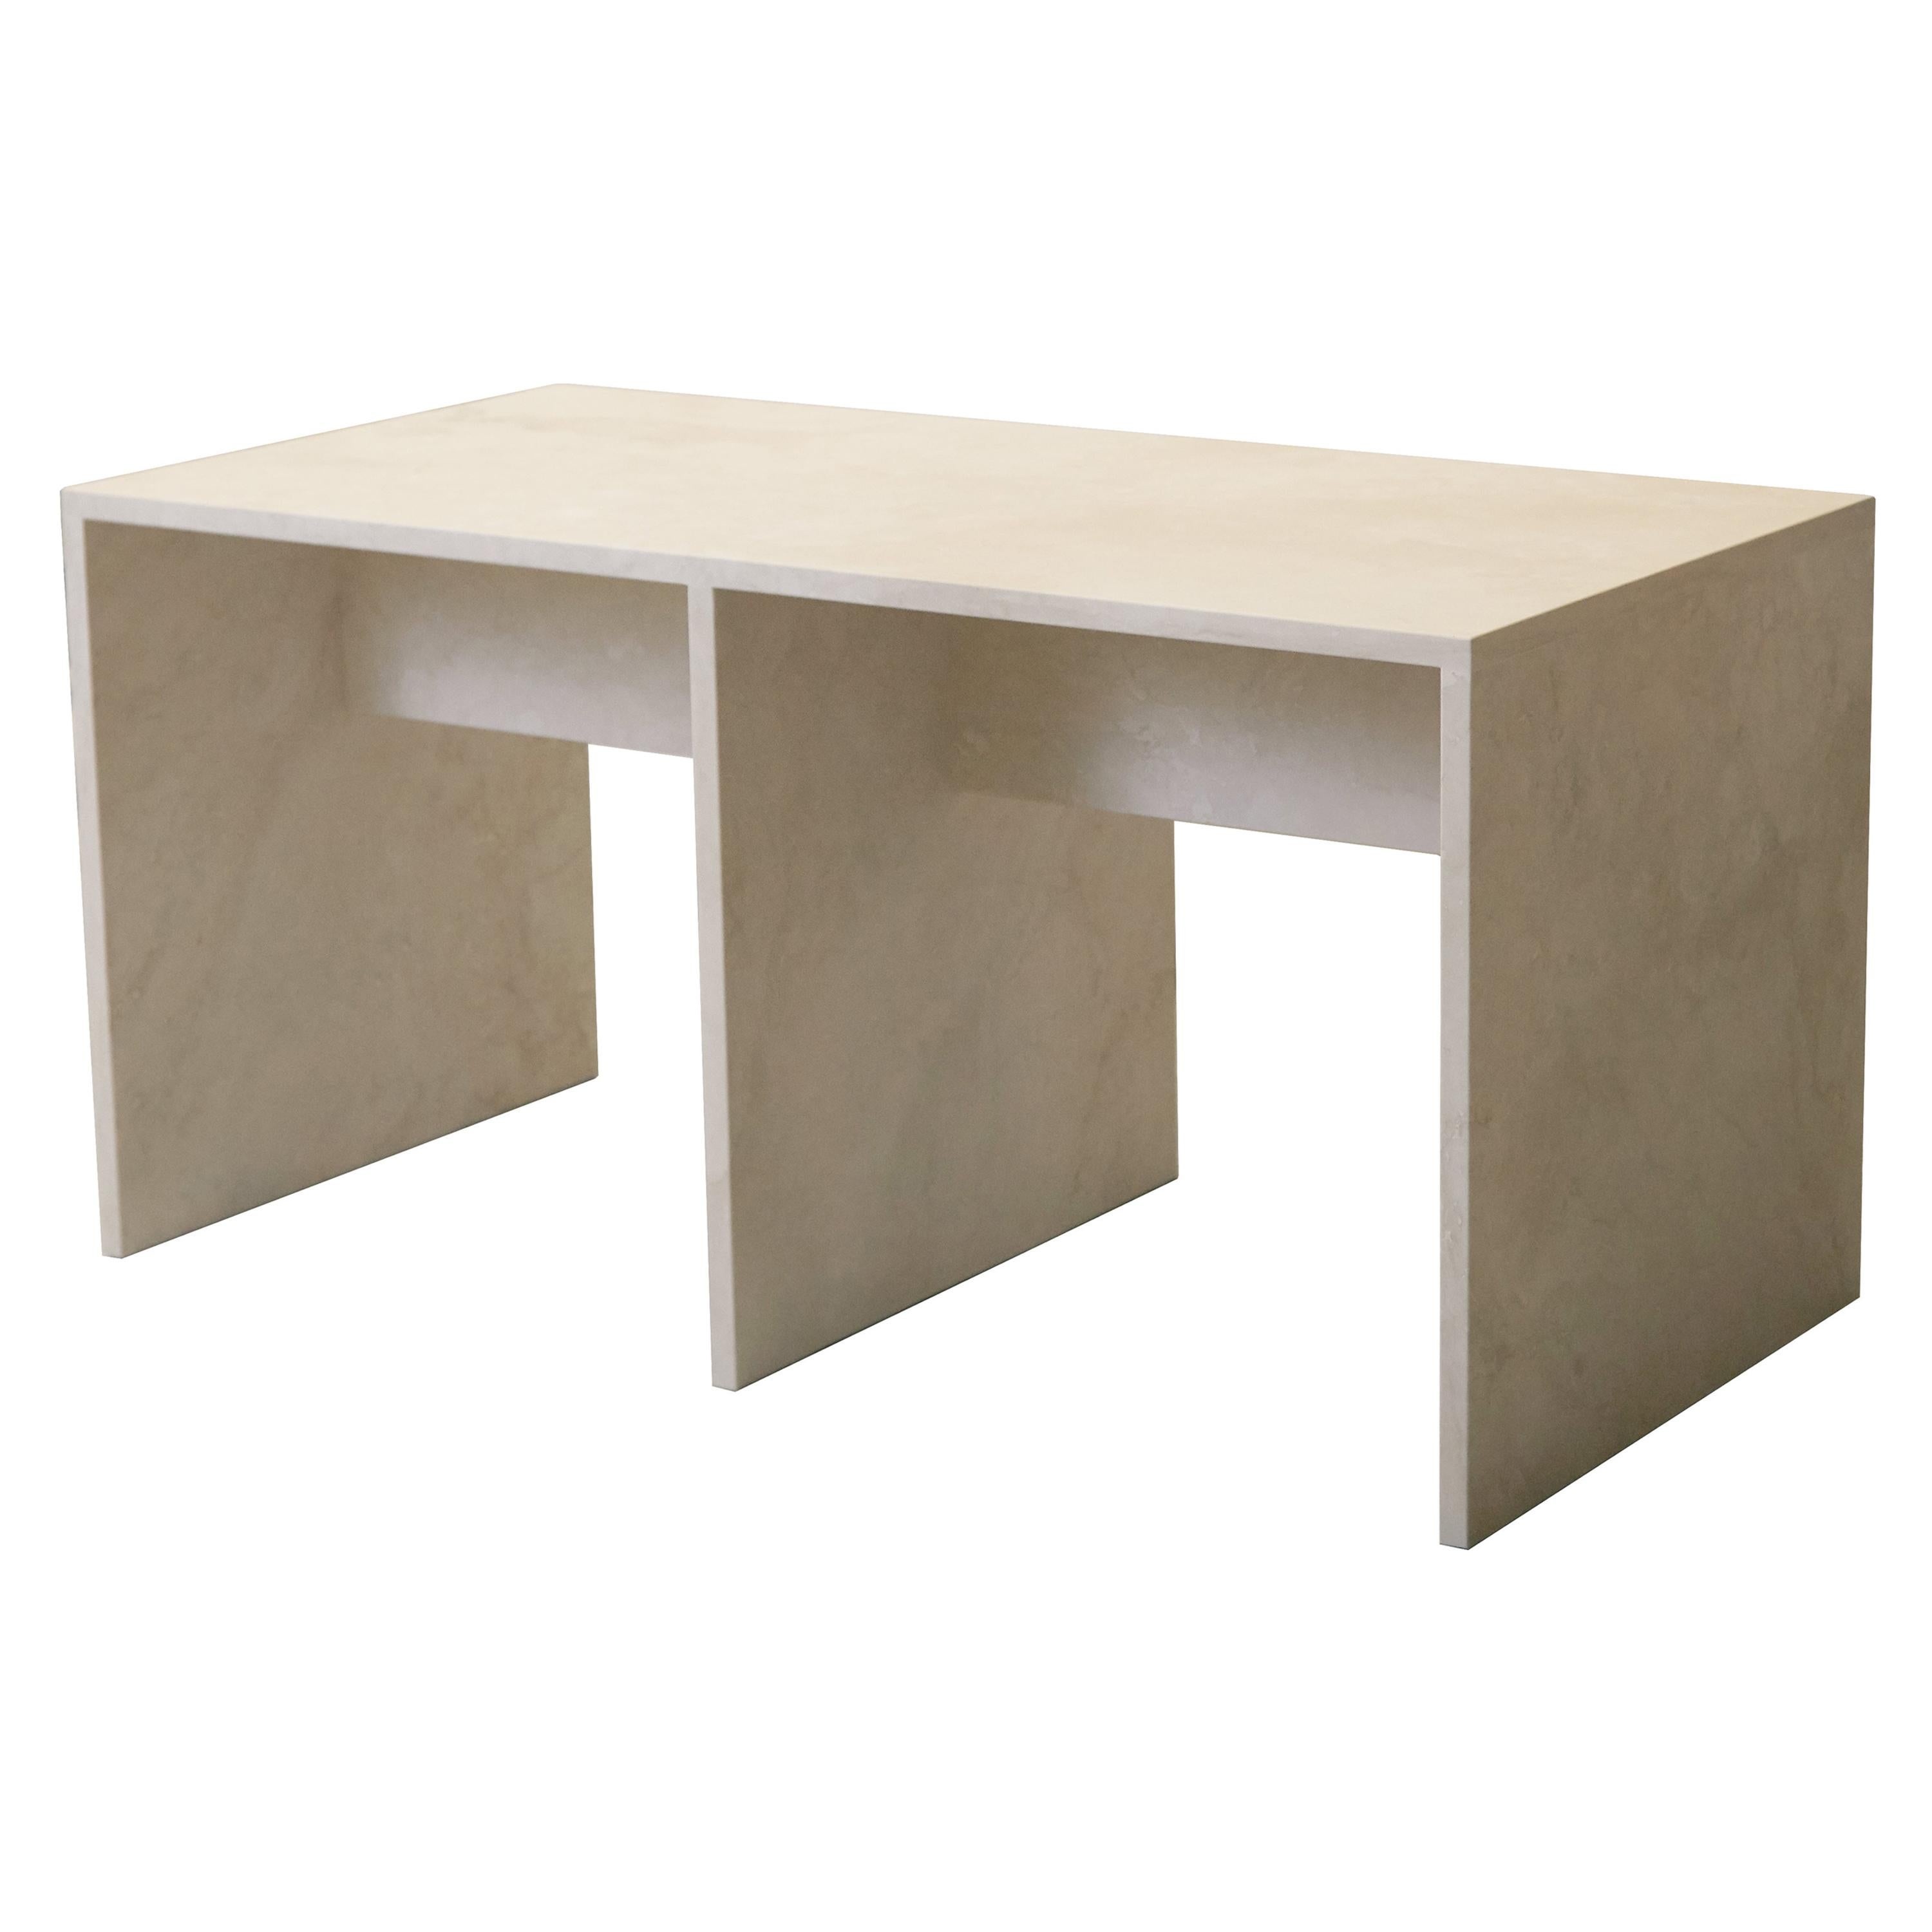 Nº113 Travertine console table or desk by Amee Allsop For Sale